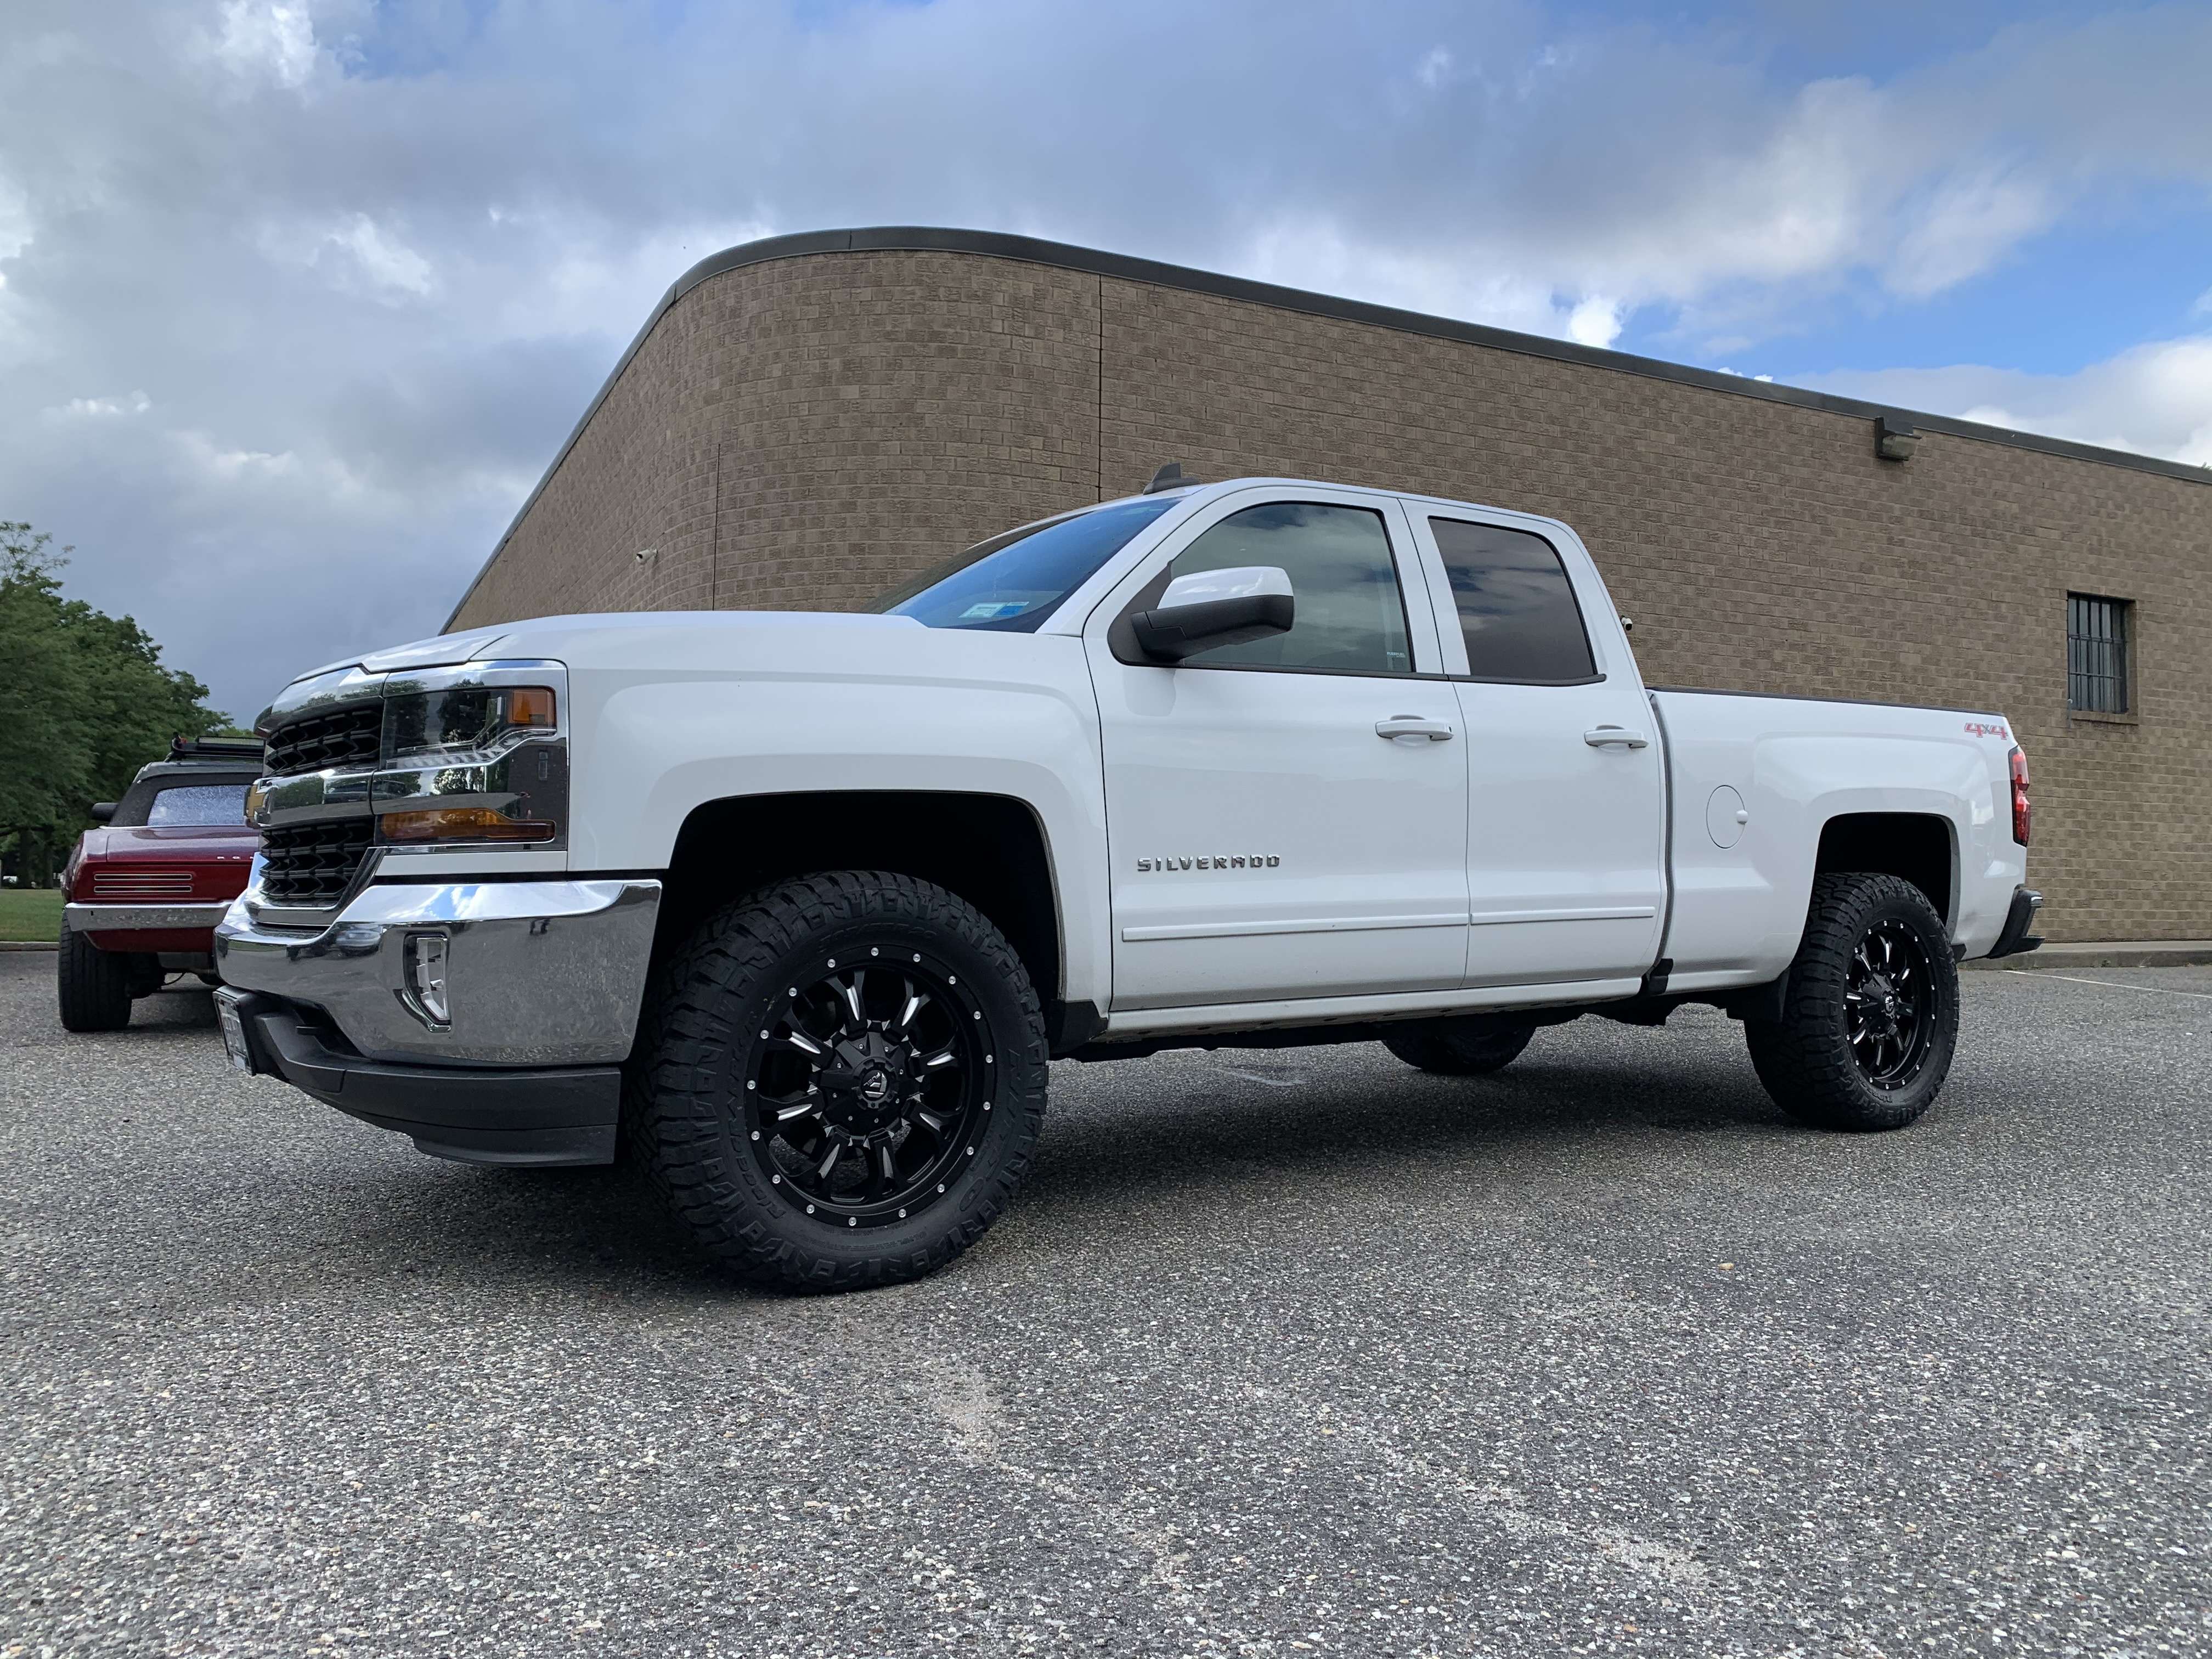 White Chevrolet Silverado,
                             lifted with tires and wheels